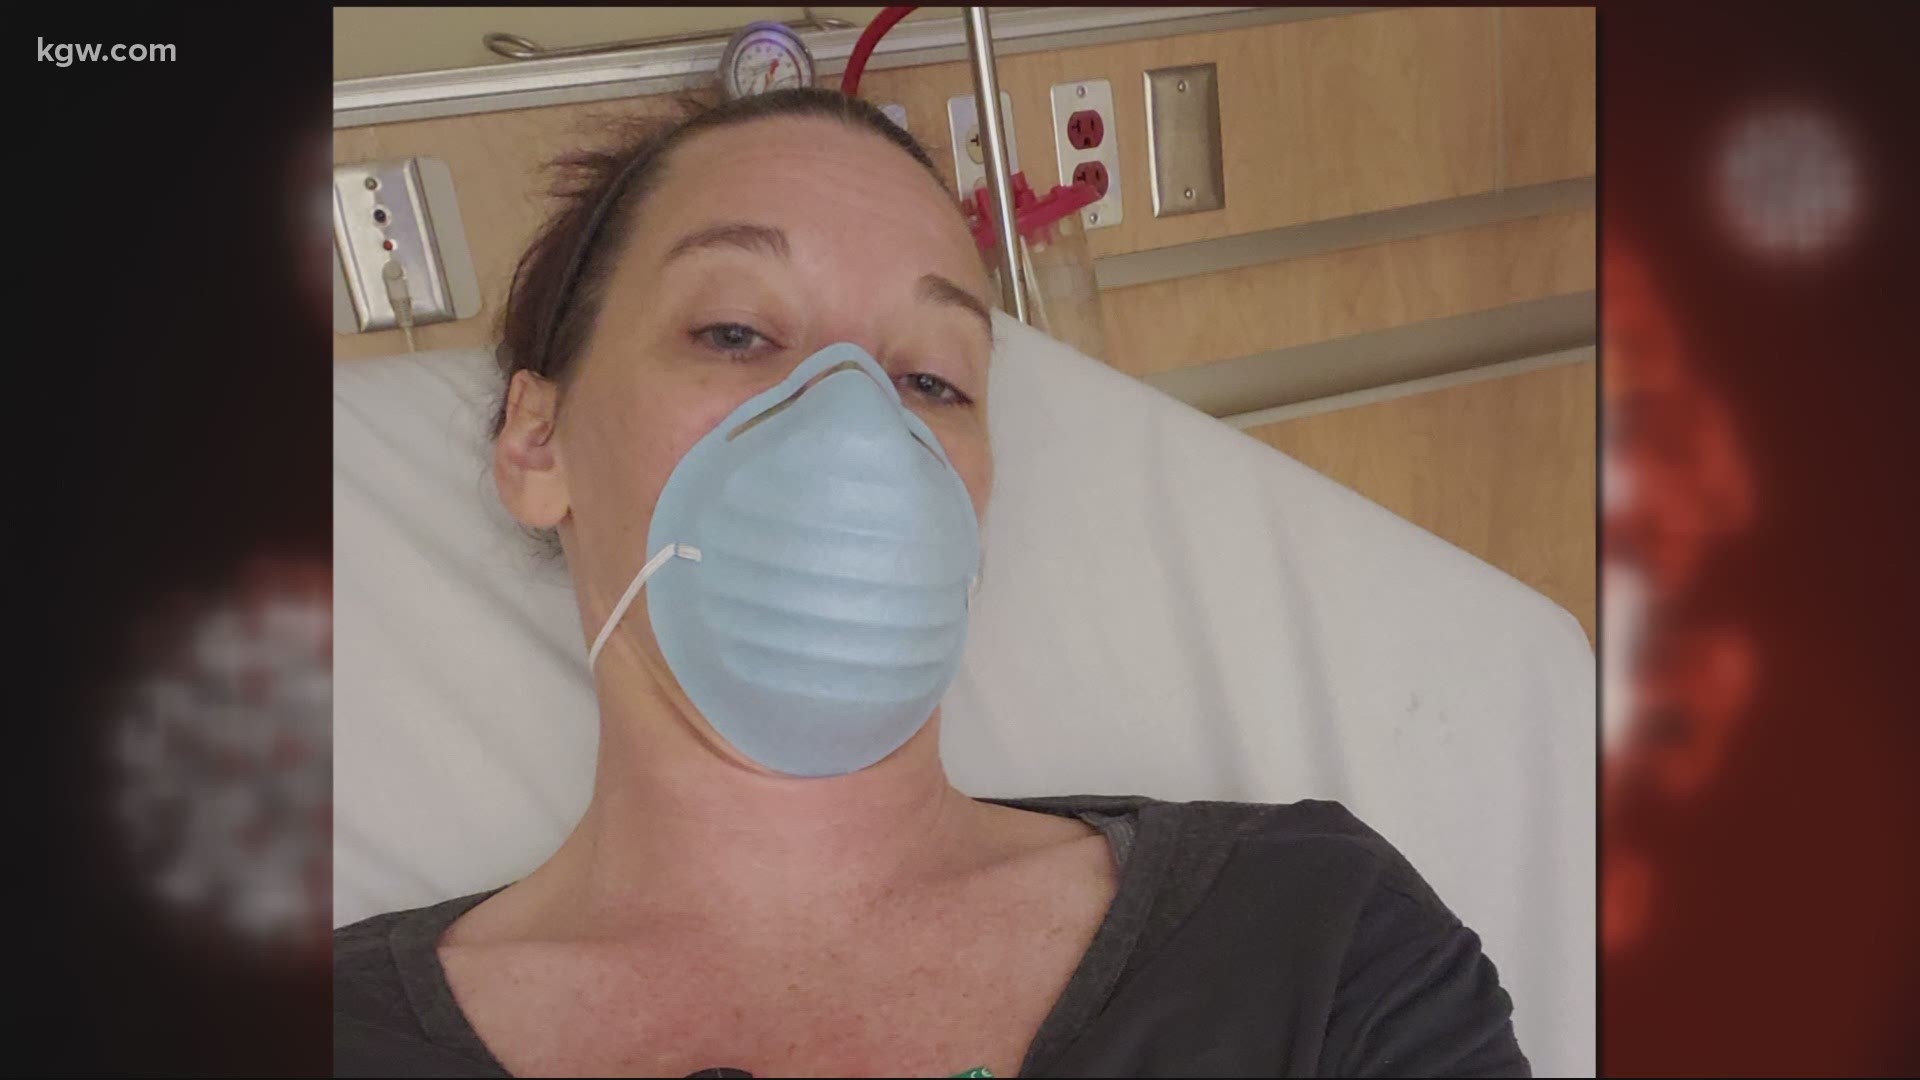 Jennifer English is one of the nearly 4,000 people in Oregon who tested positive for COVID-19. She shares her story on recovering.